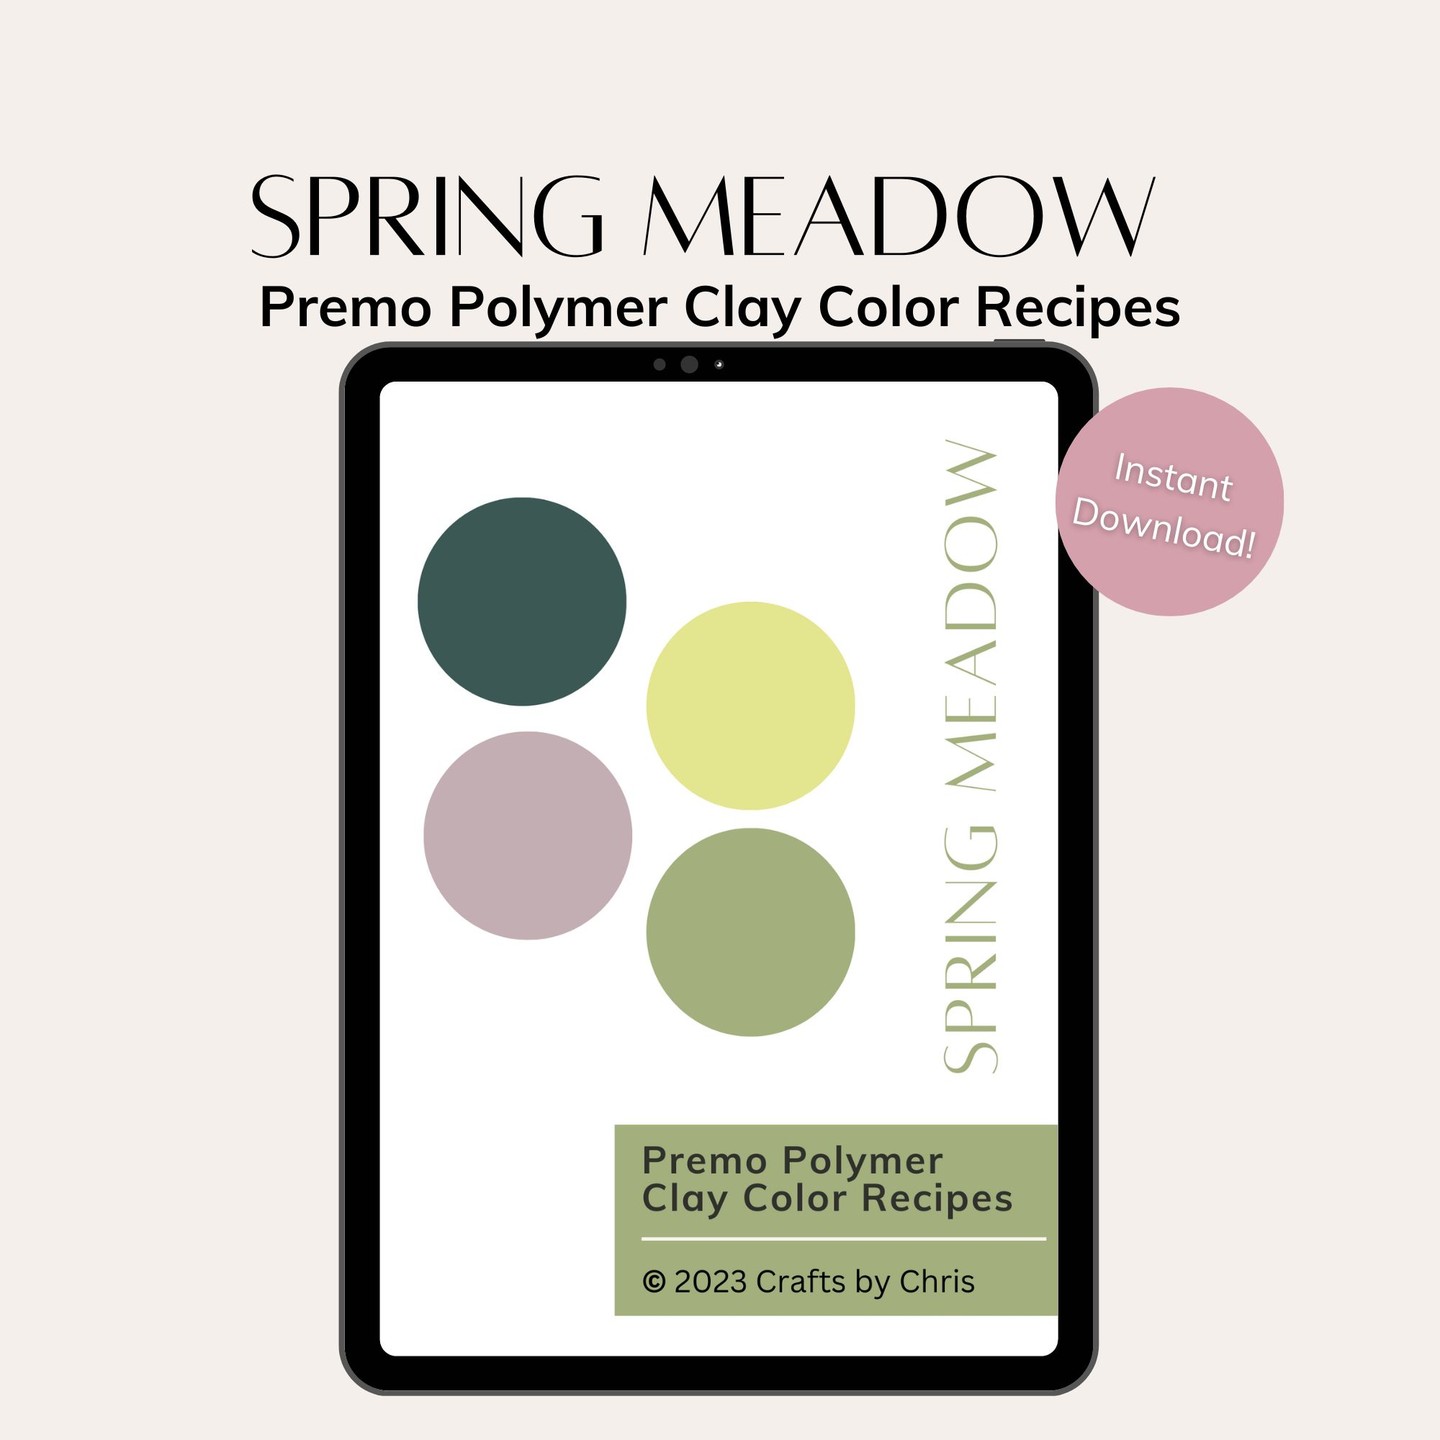 Premo Polymer Clay Color Recipes for Spring Meadow Color Palette. Link in bio

#polymerclaycolorrecipes #polymerclaycolo